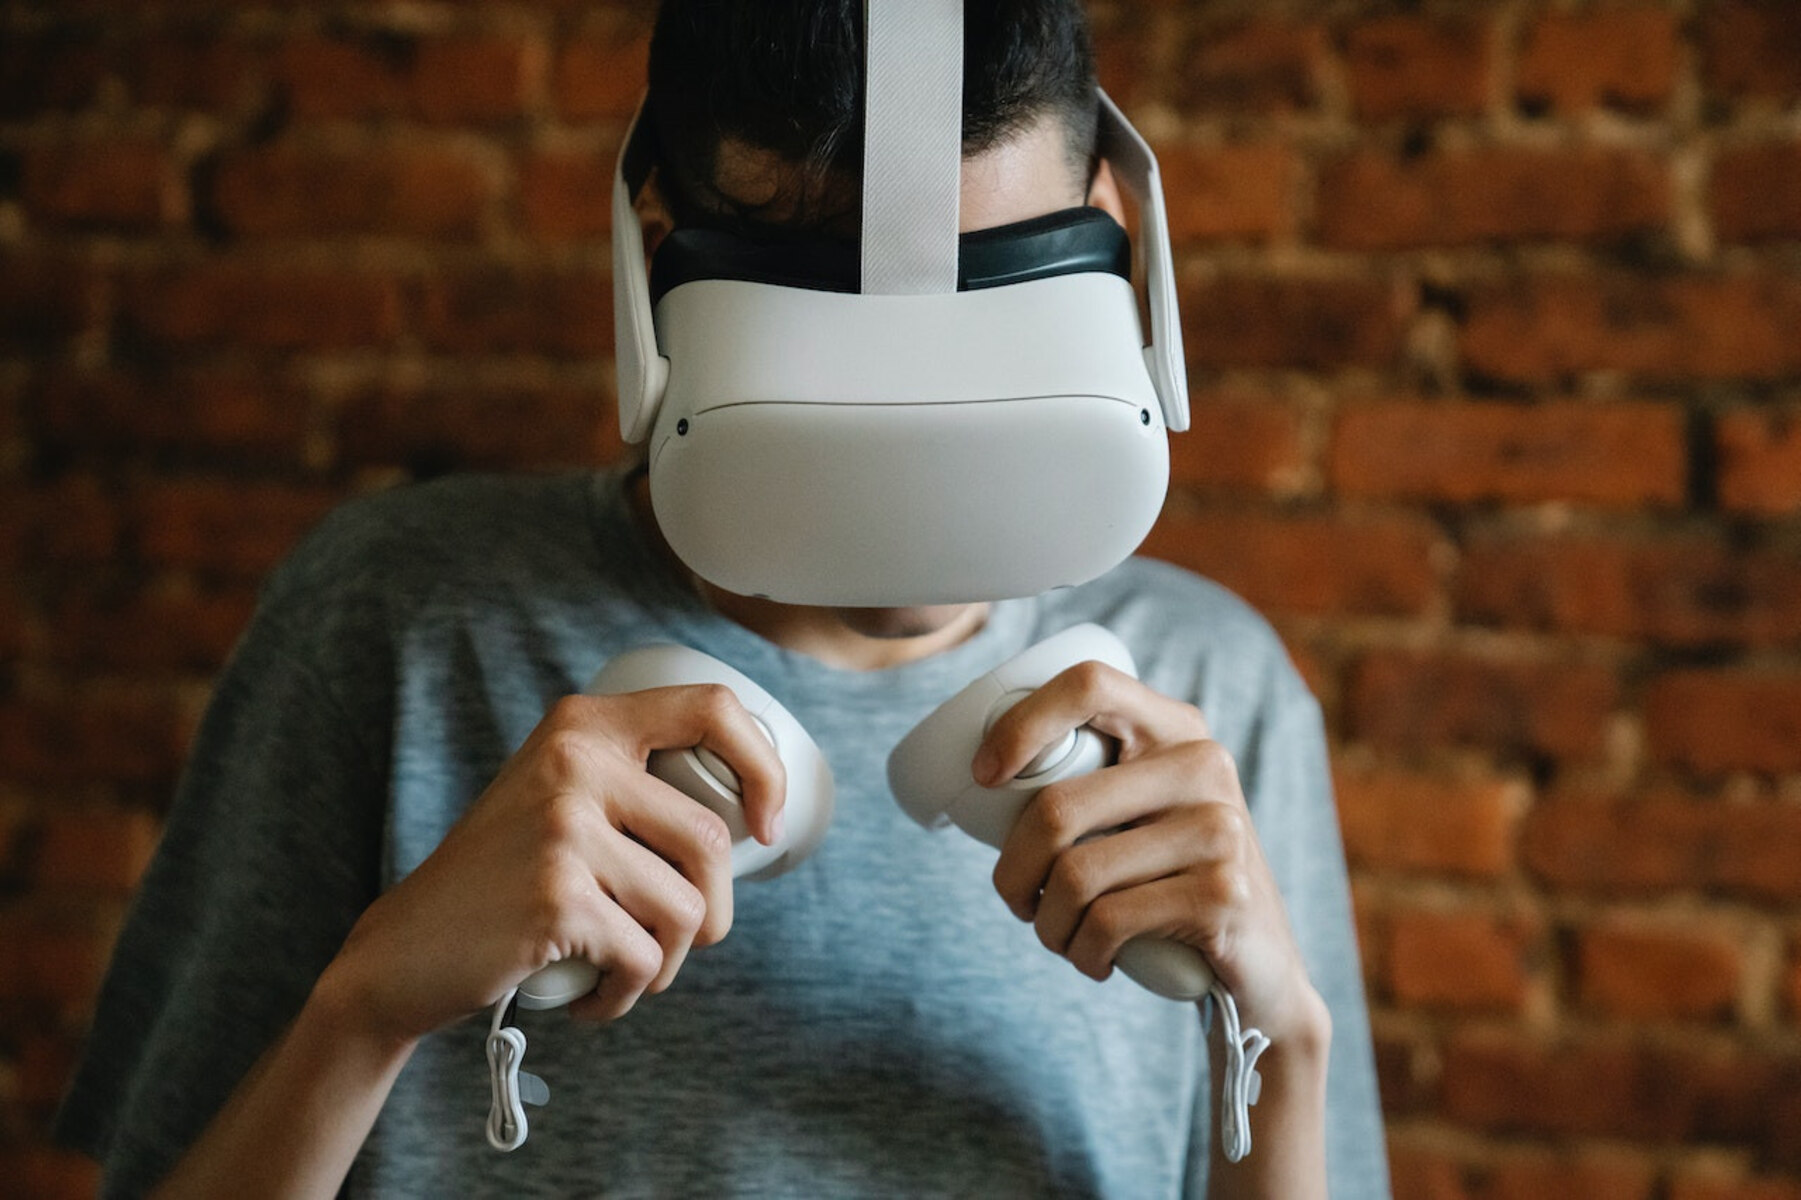 what-vr-headset-has-full-body-tracking